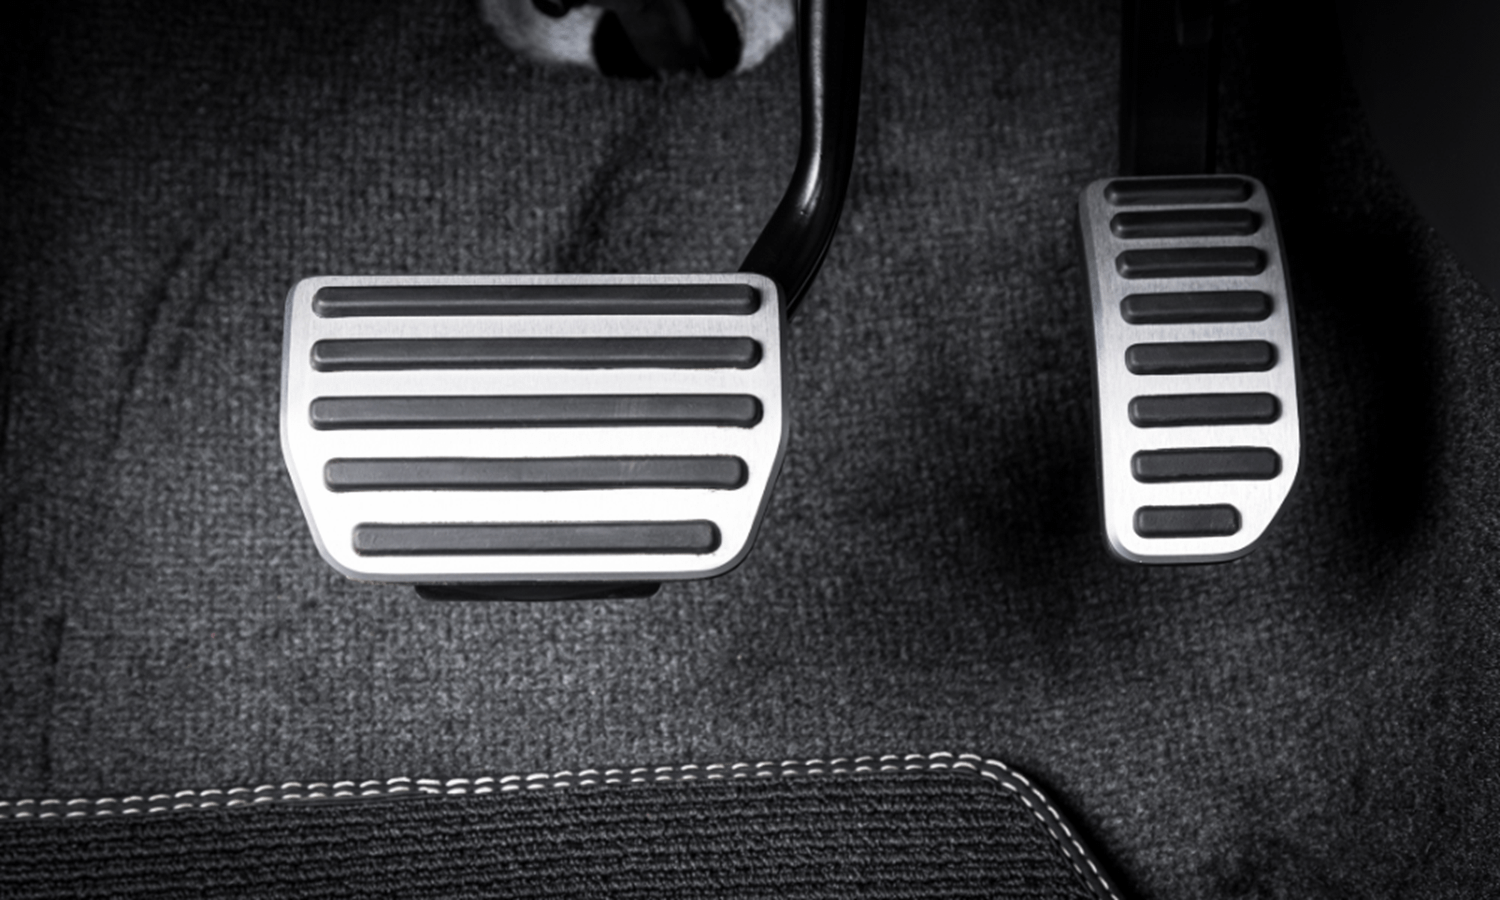 brake pedal and accelerator pedal in a car